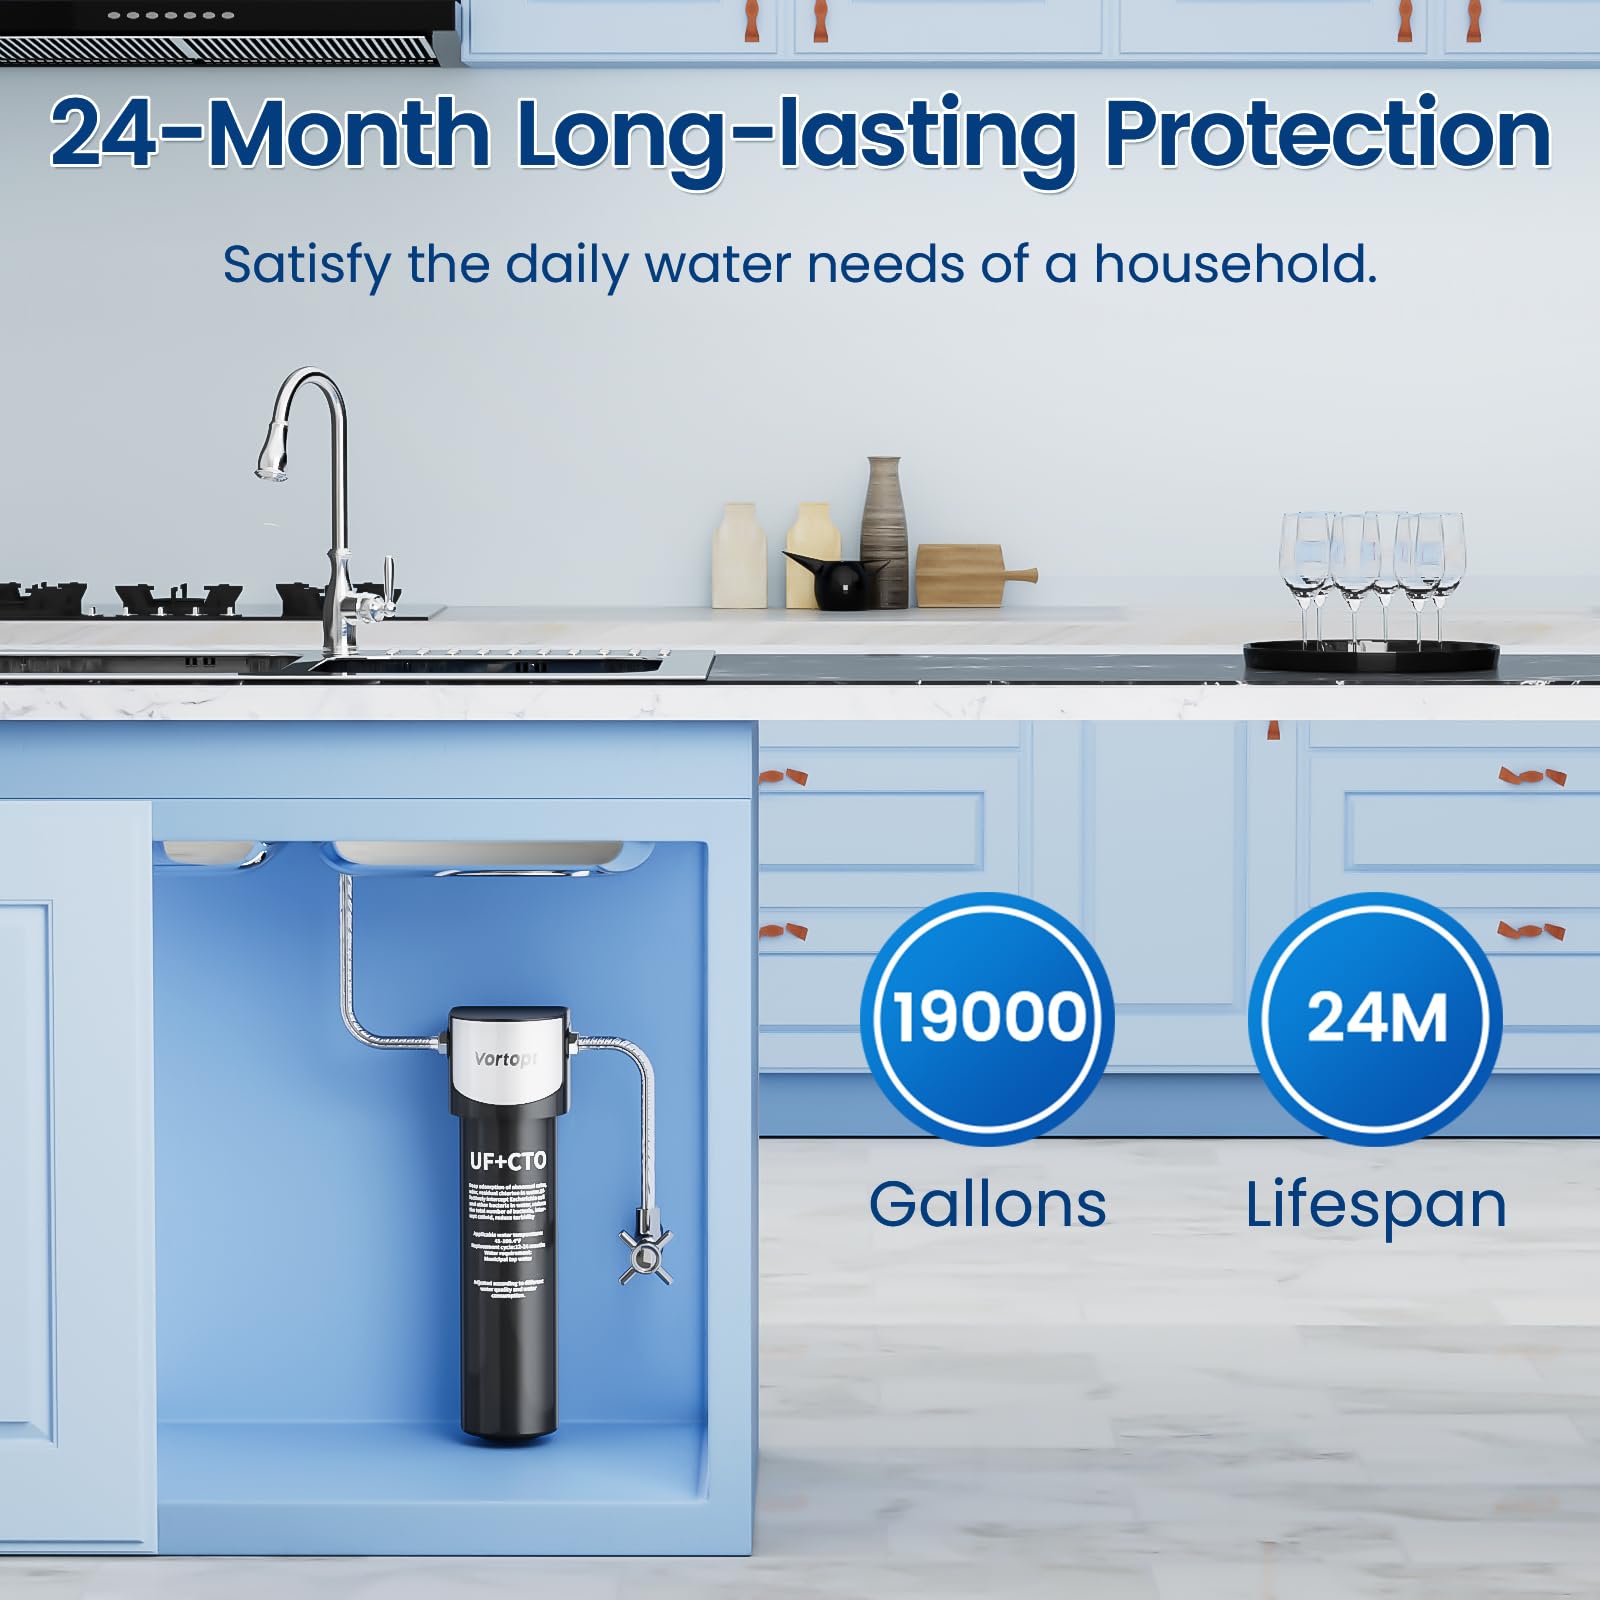 T1 400G Faucet Water Filter for Sink, Vortopt